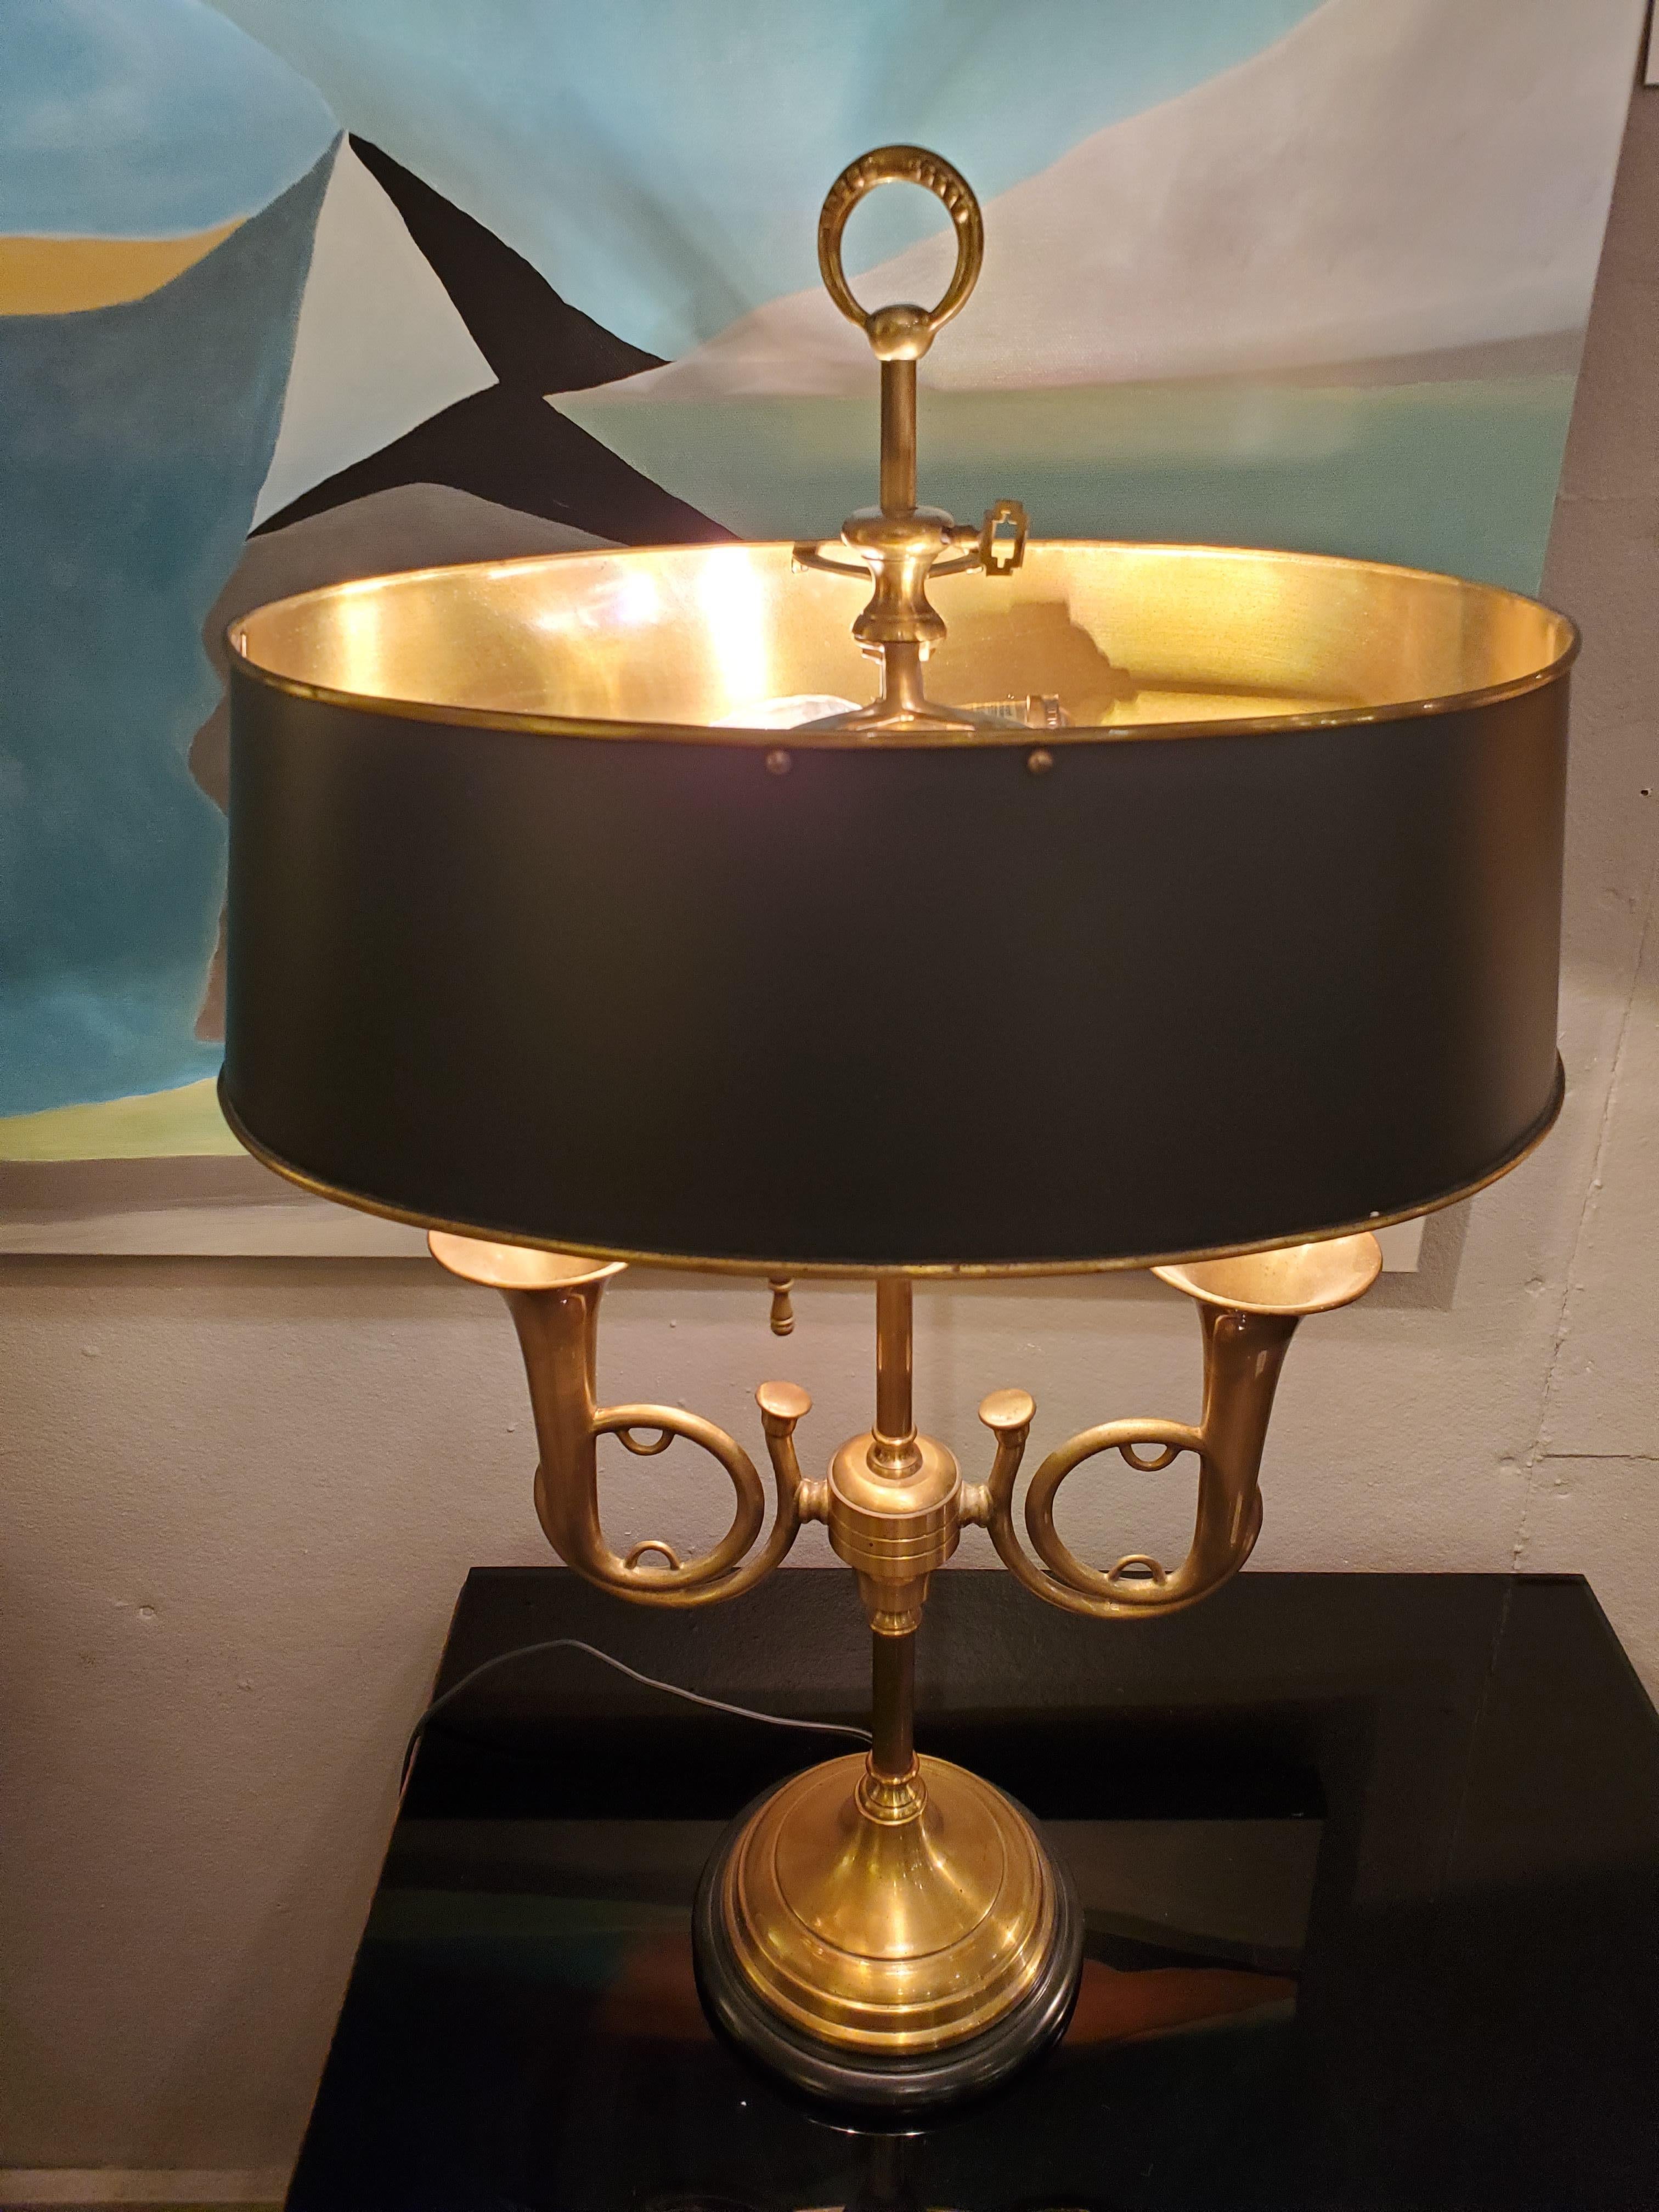 Handsome brass horn motife table lamp having black metal shade and base. A classic.